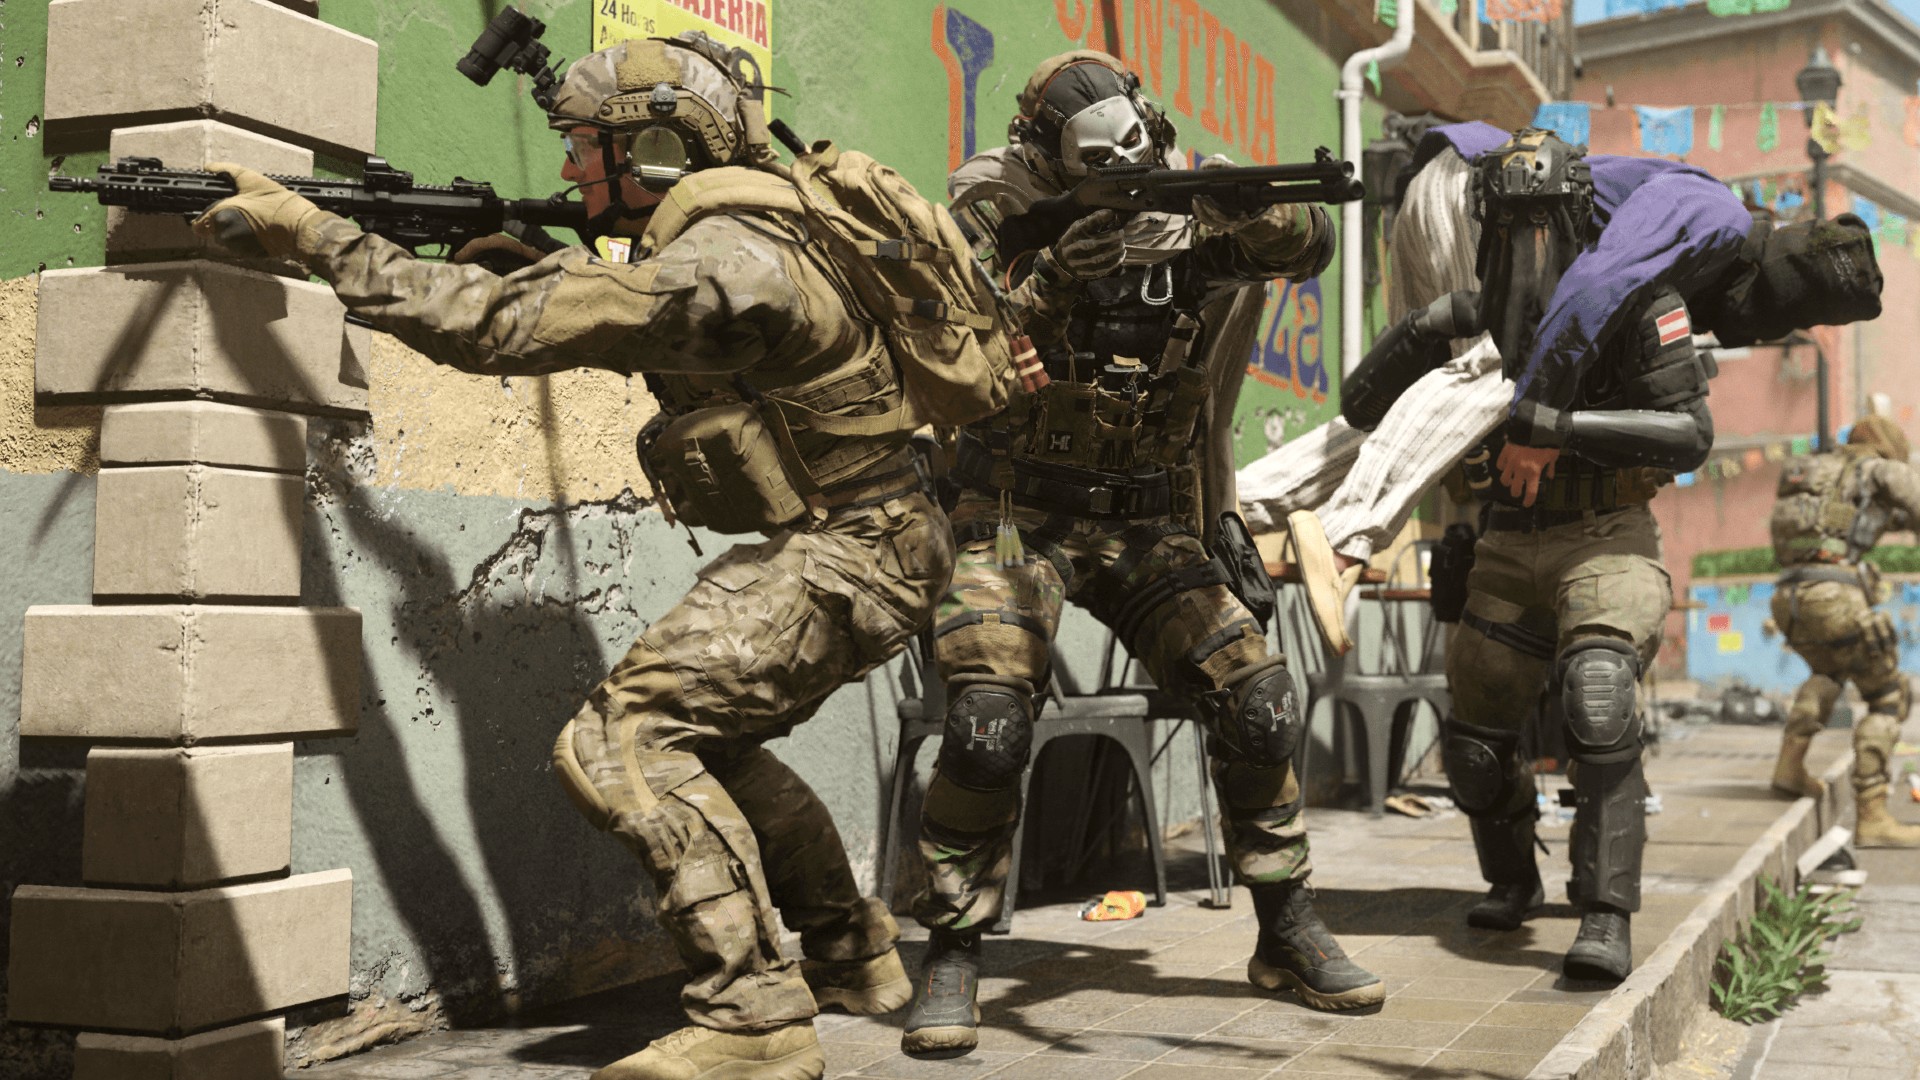 First Modern Warfare 2 campaign details revealed: Locations, characters &  missions - Dexerto